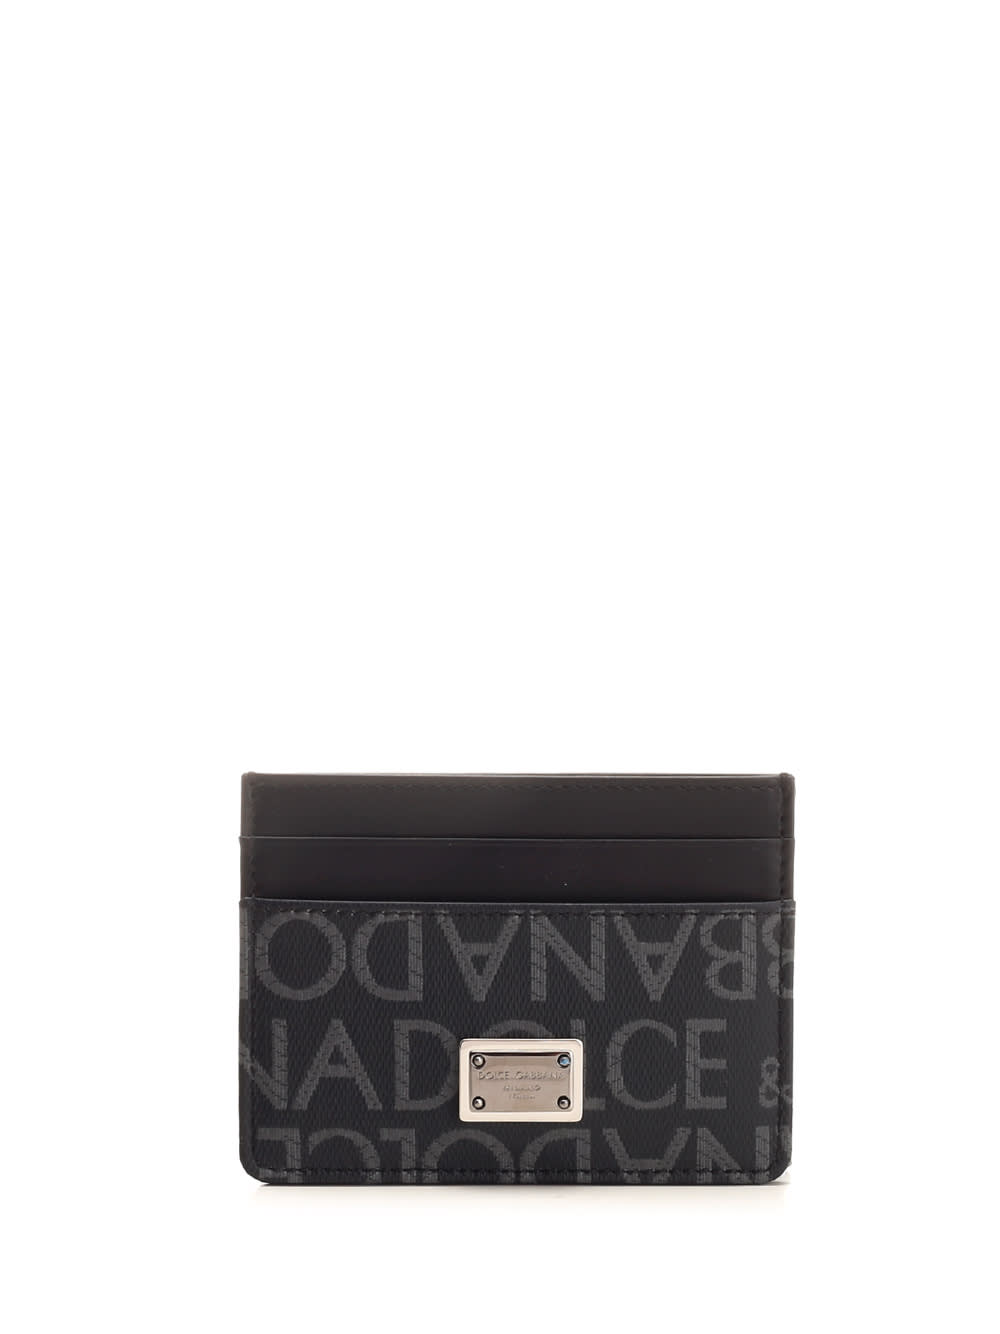 DOLCE & GABBANA CARD HOLDER WITH ALL-OVER LOGO